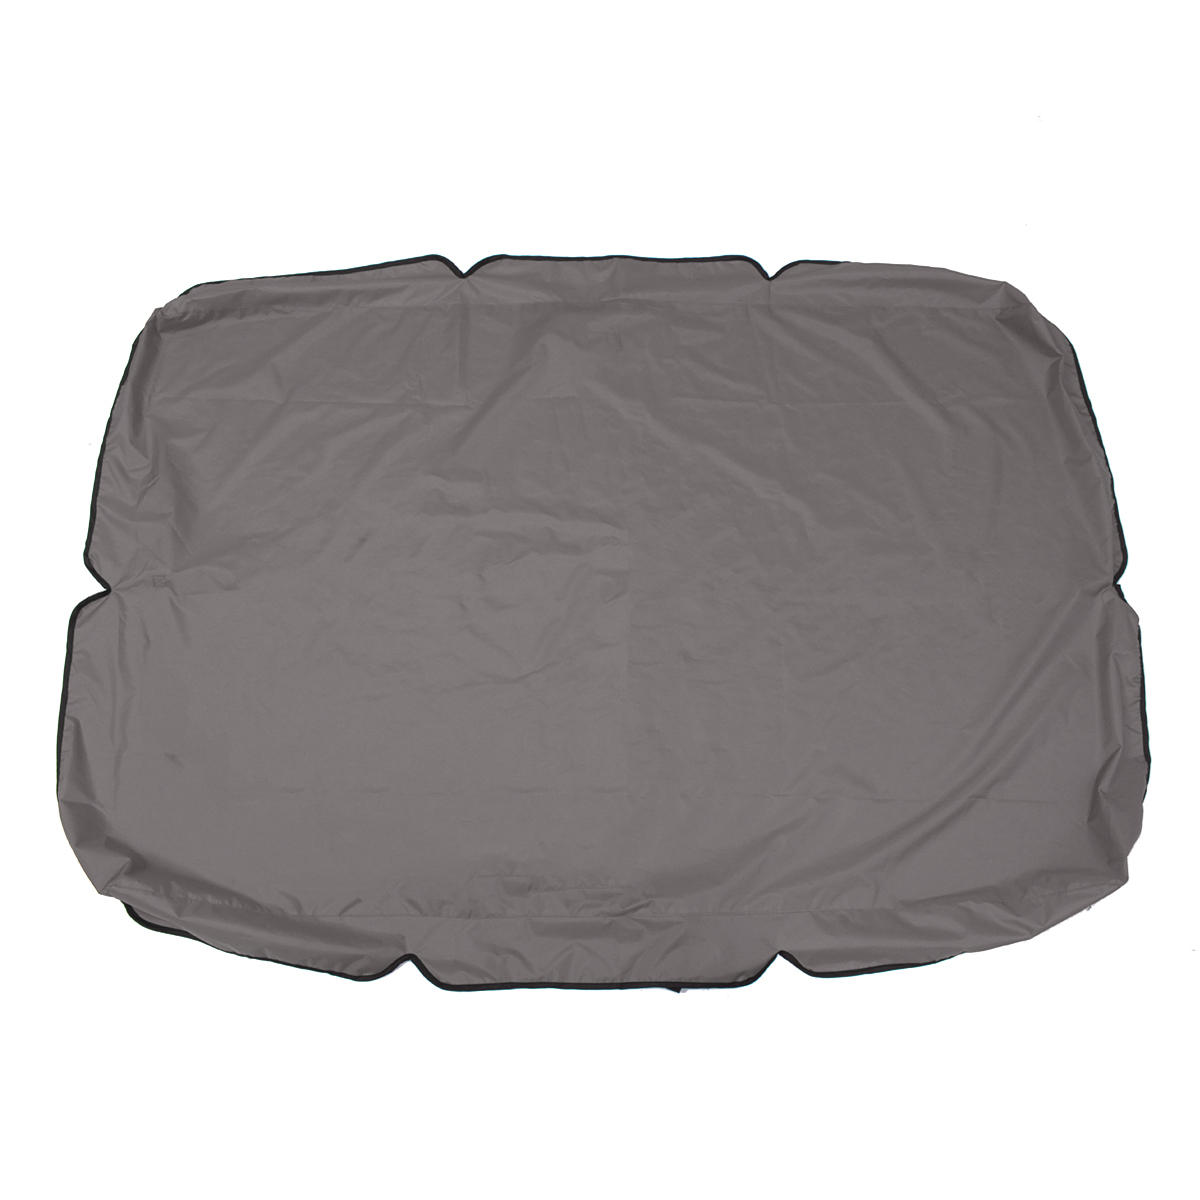 best price,patio,swing,canopy,top,cover,75x52x5.9inch,coupon,price,discount